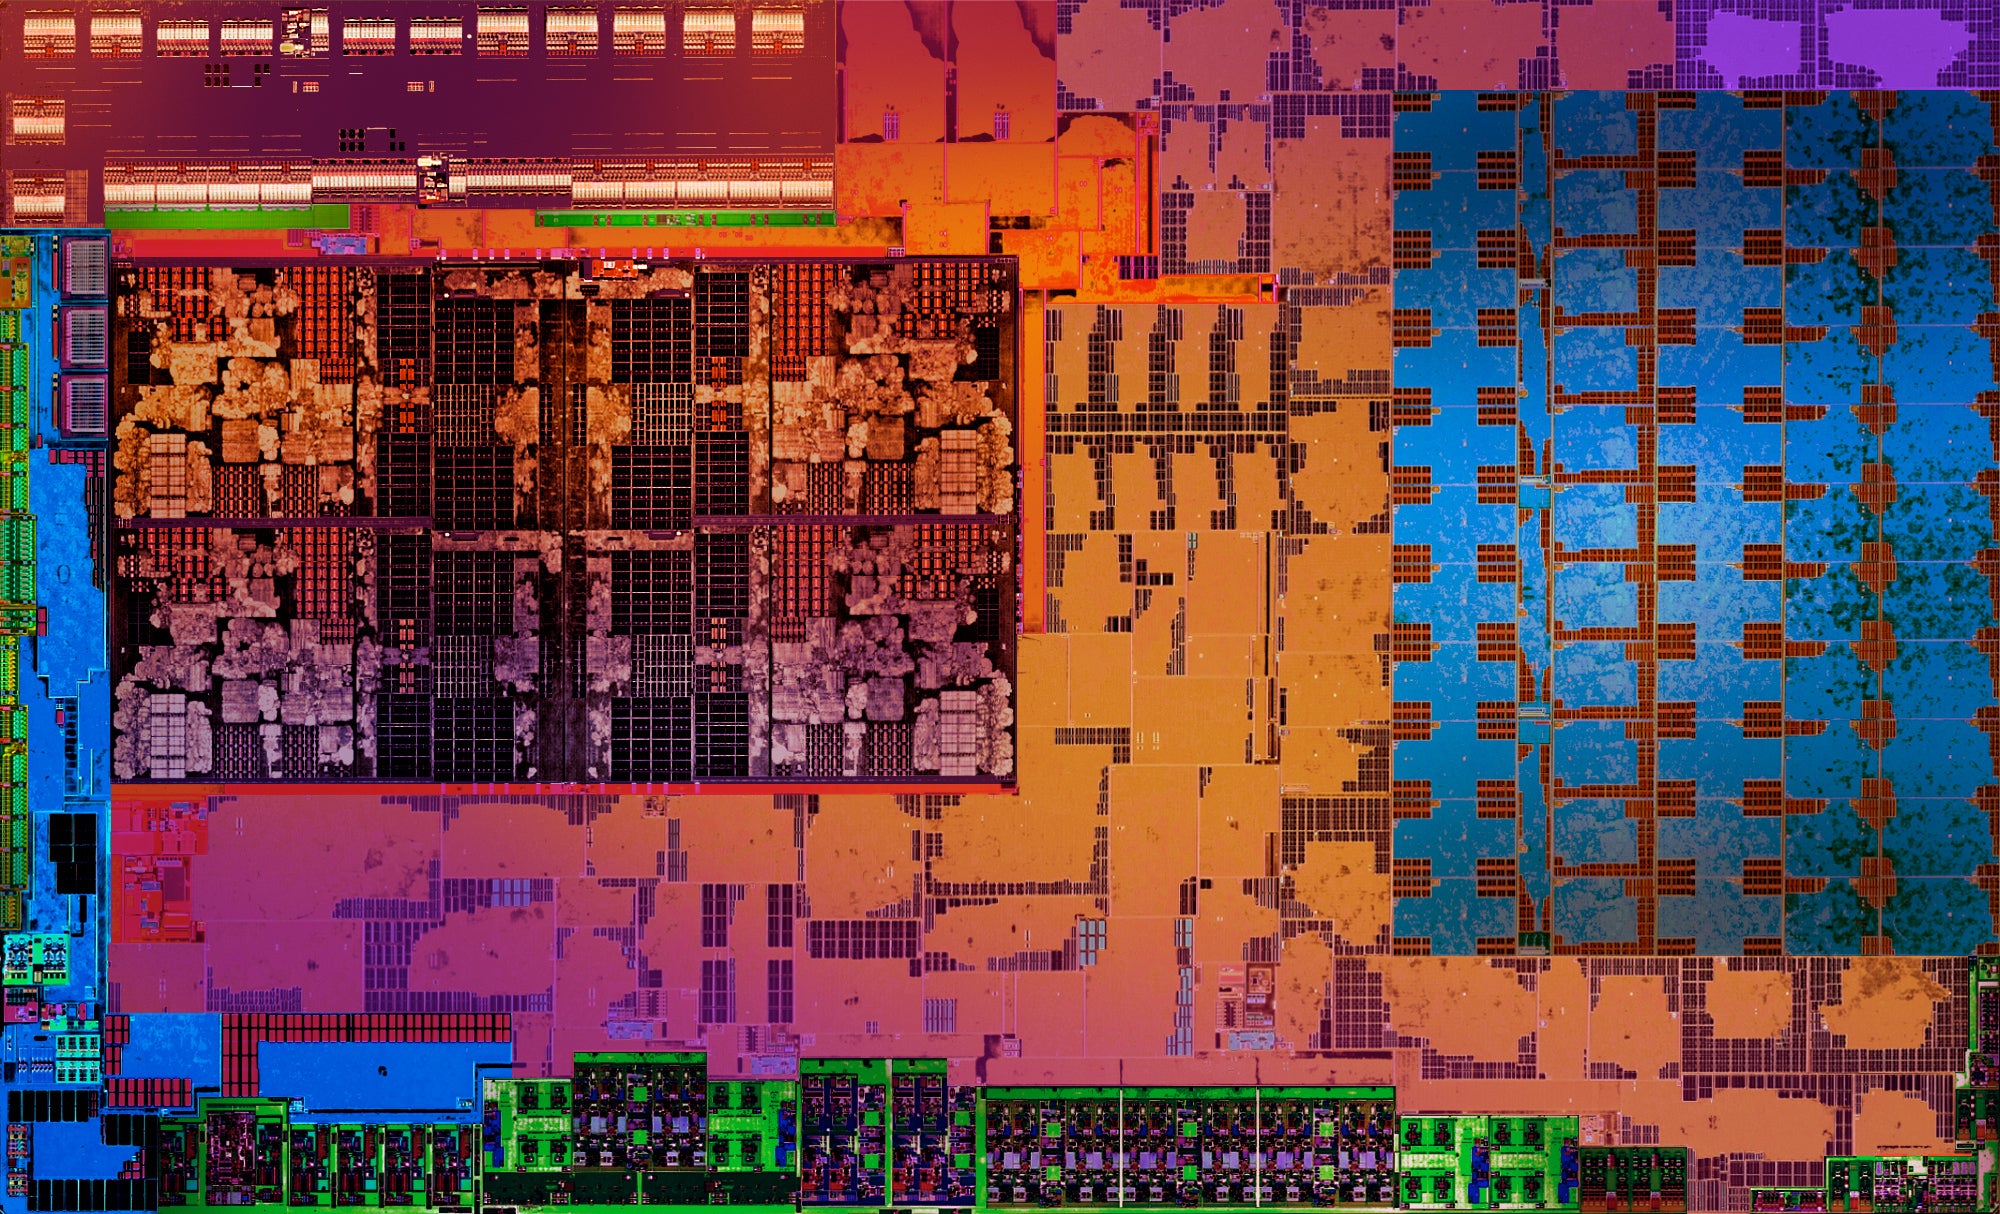 AMD’s New Chips Could Finally Offer A Good Alternative To Intel In Laptops